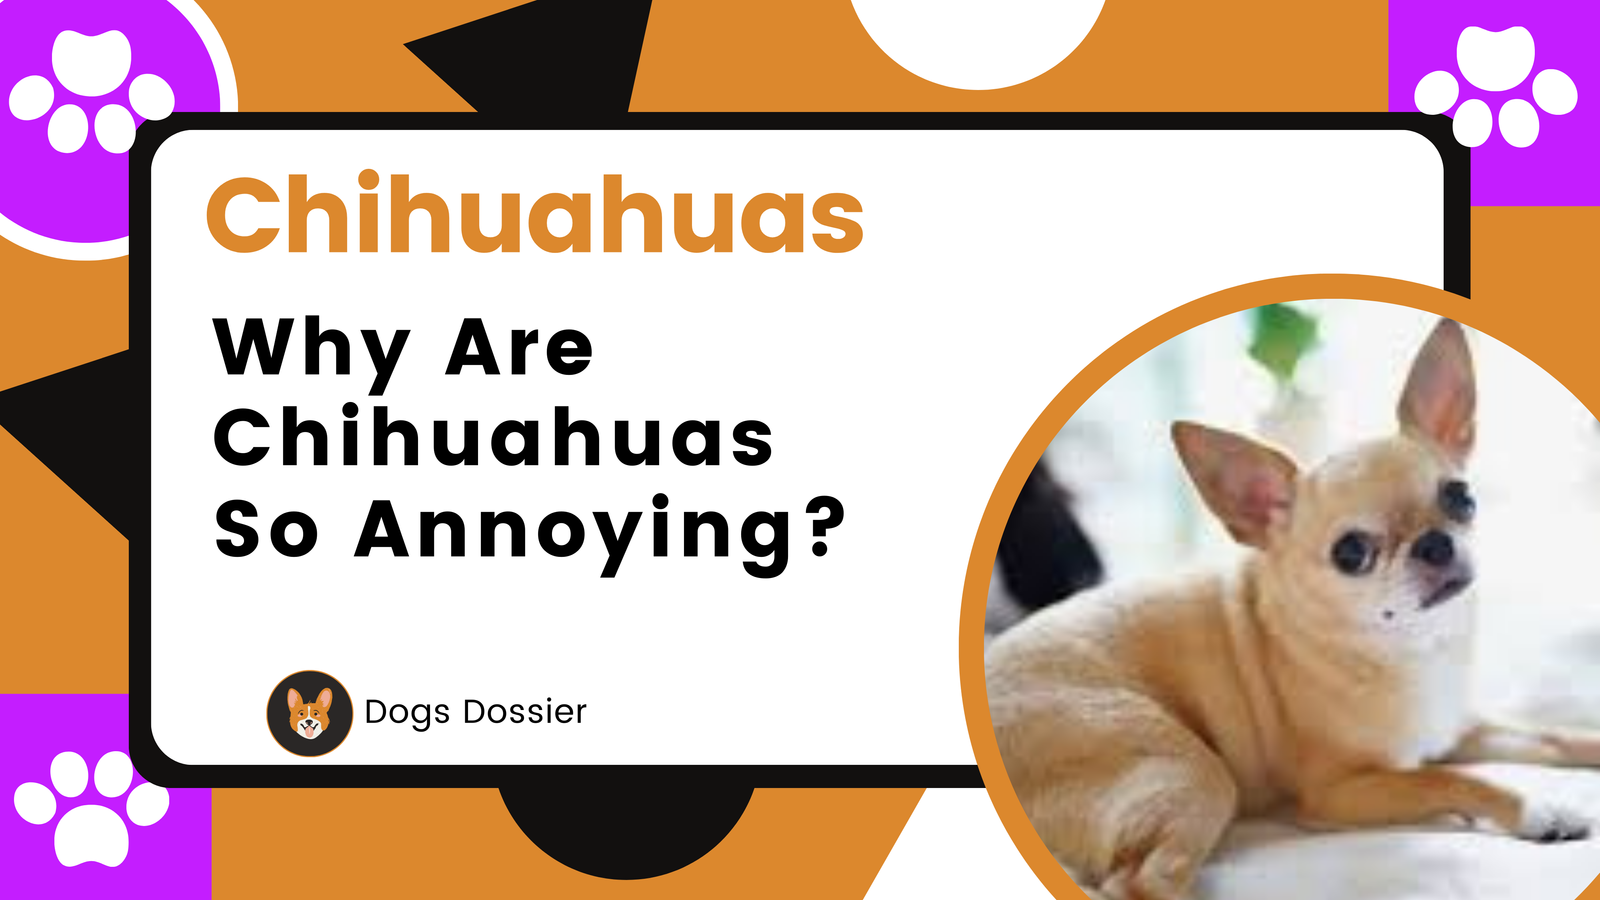 Why Are Chihuahuas So Annoying?